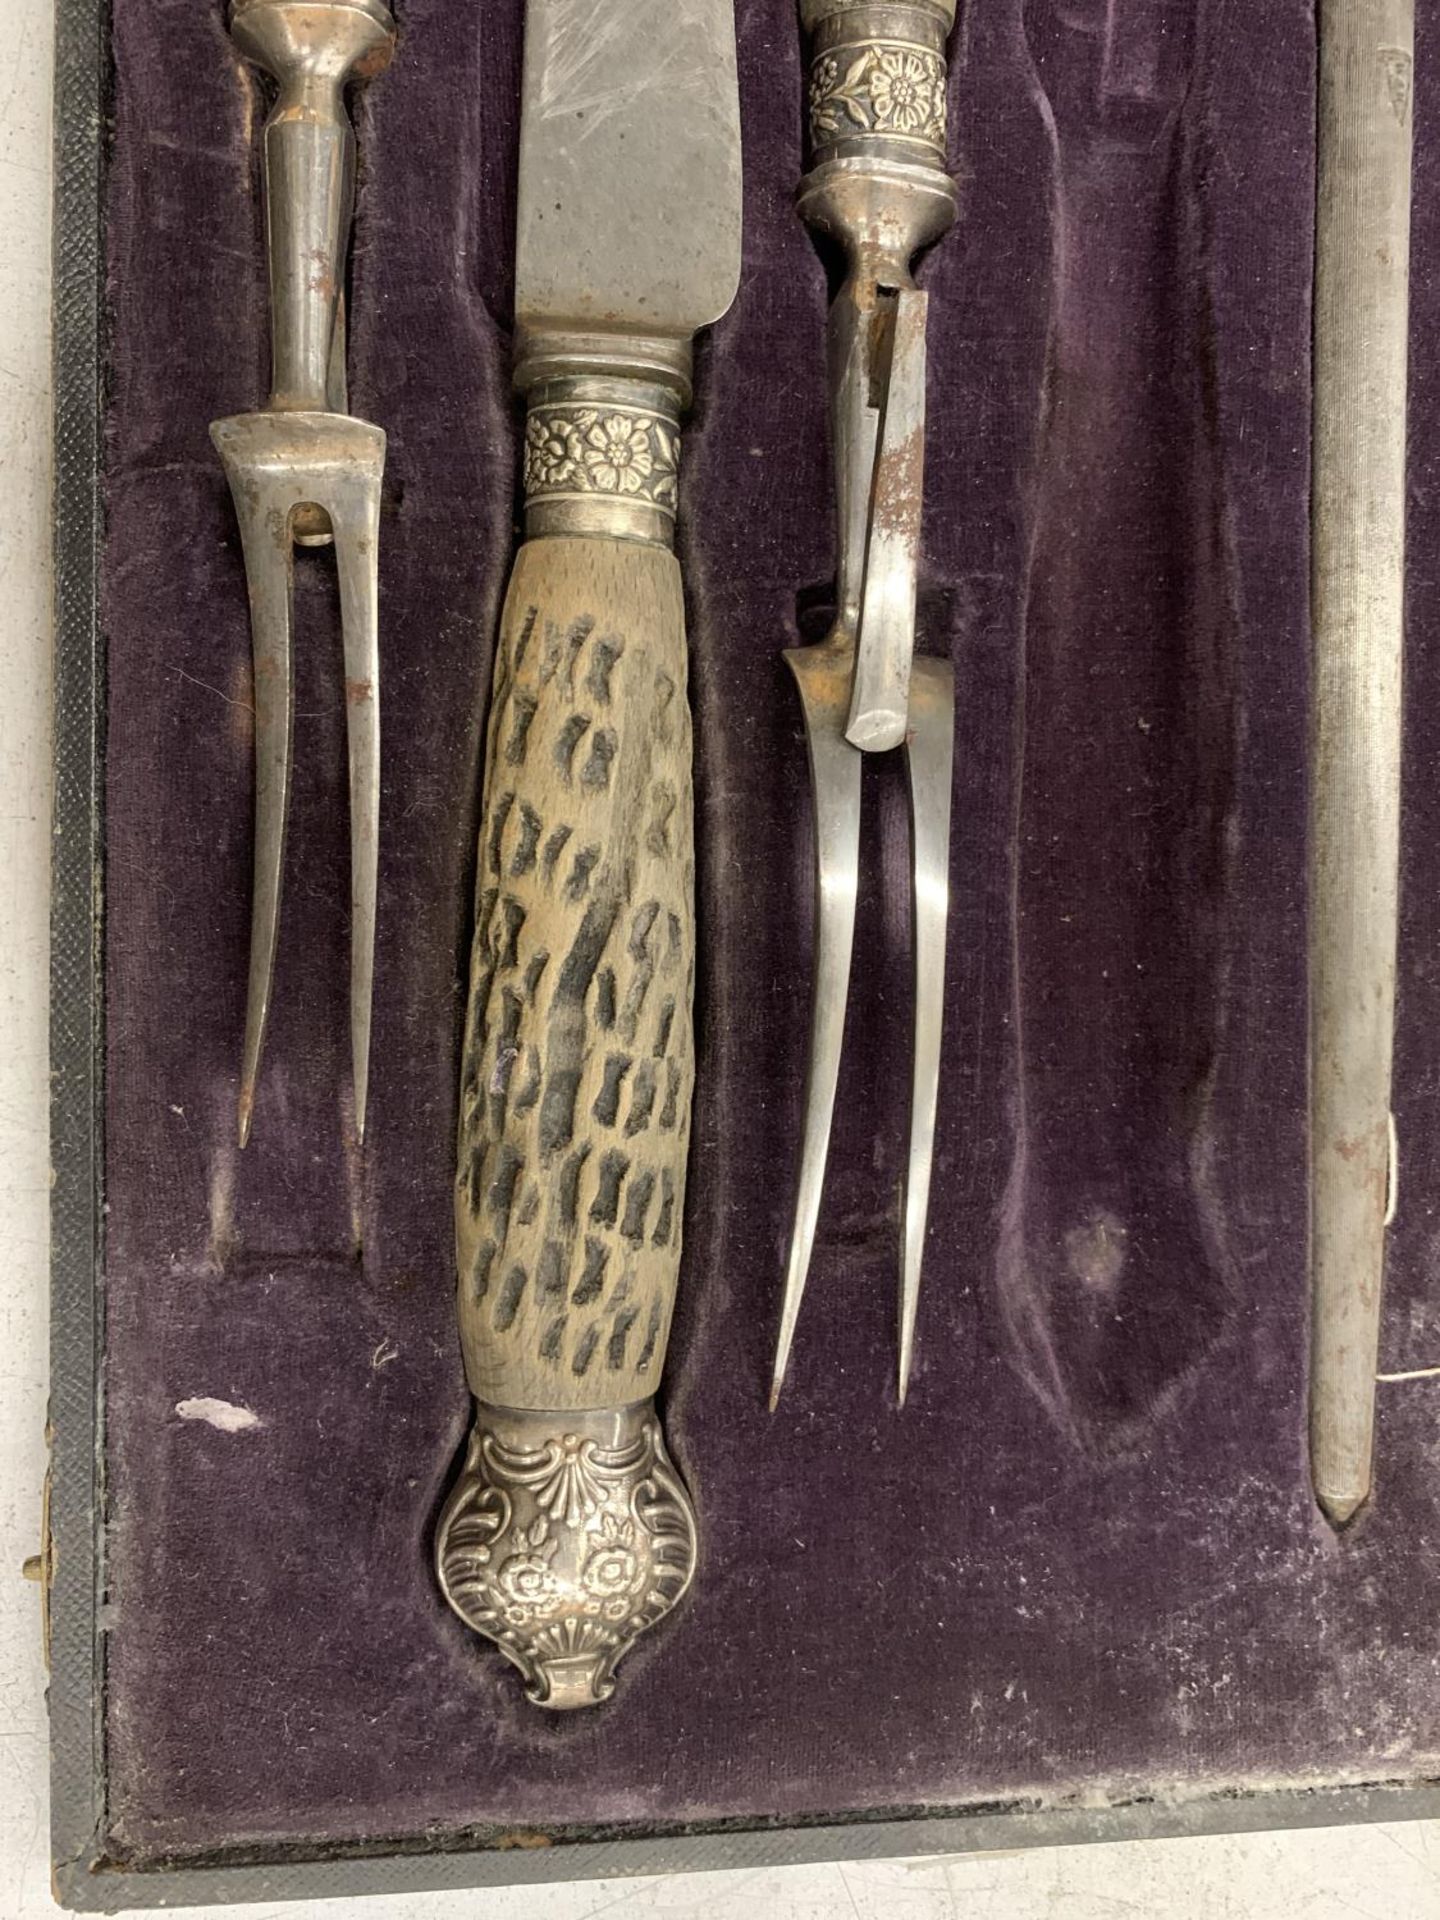 A VINTAGE BOXED CARVING SET - Image 2 of 3